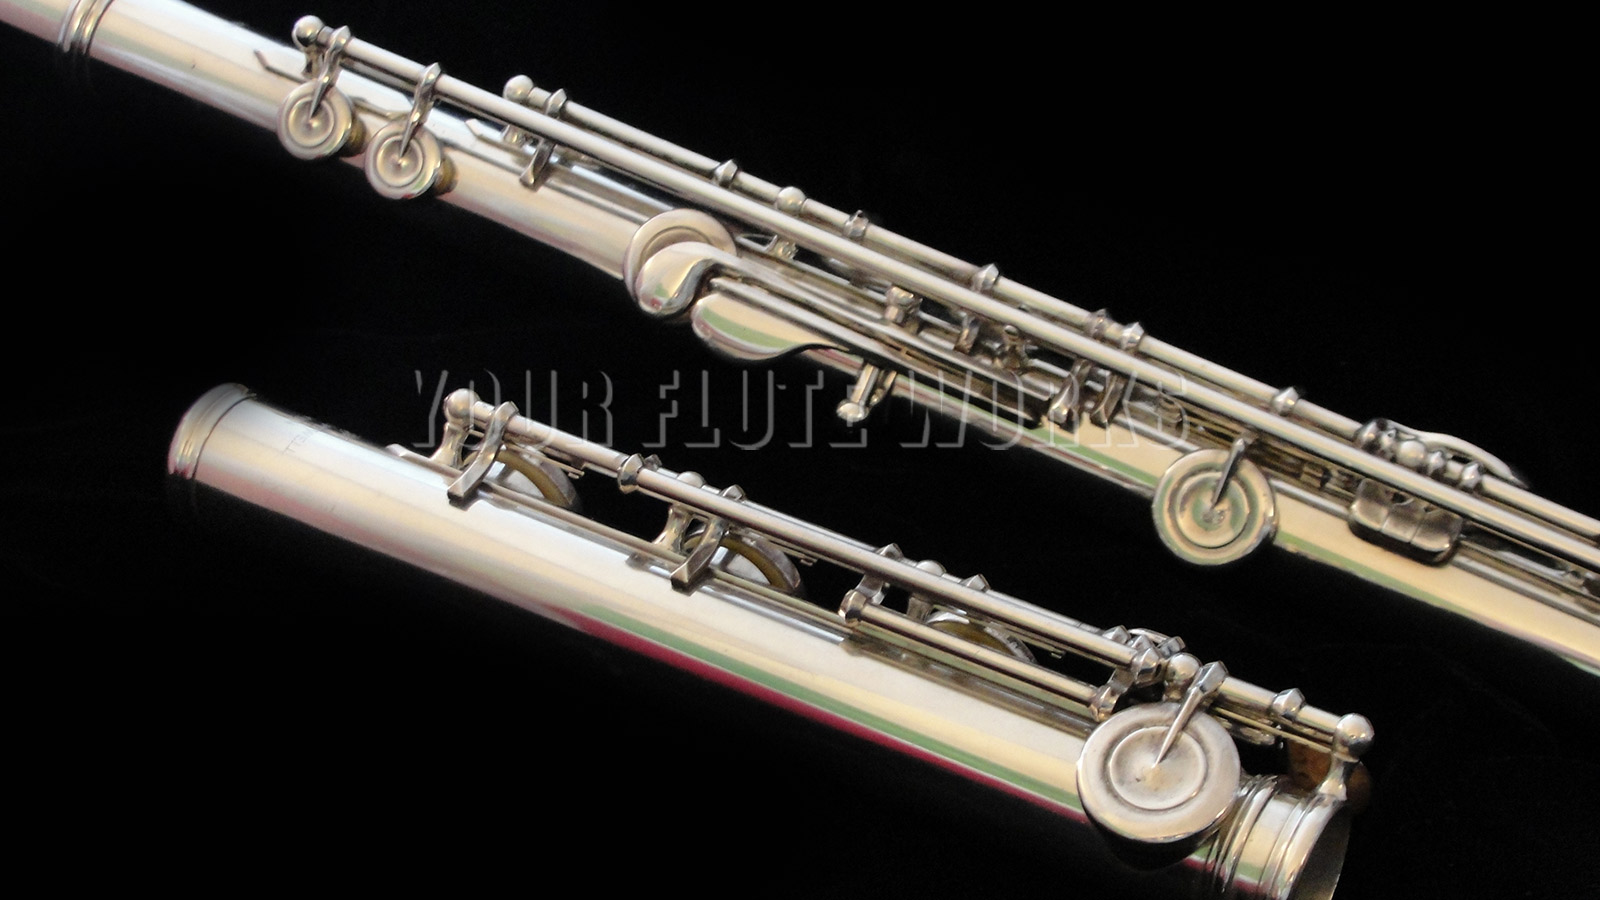 Verne Q. Powell Silver Flute #1597 and Pt. 4 Powell Head